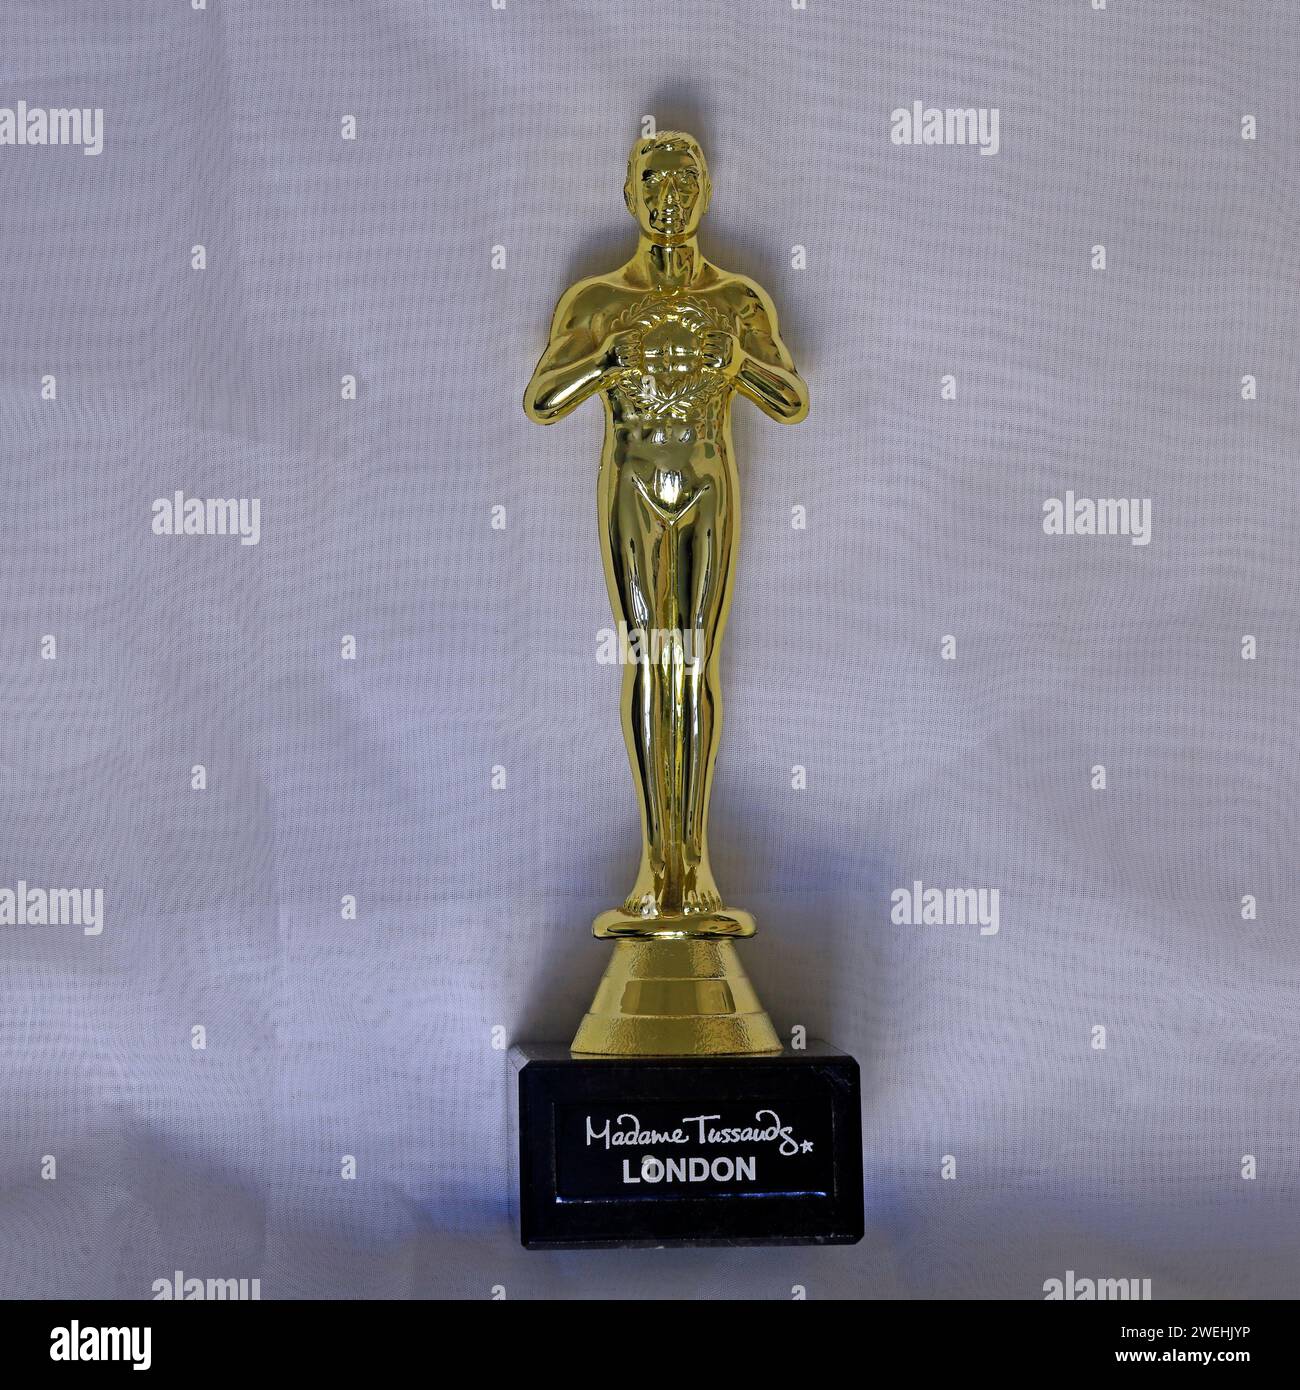 Academy Award statuette - a souvenir of Madame Tussauds of London, Studio set up on light / white background Stock Photo